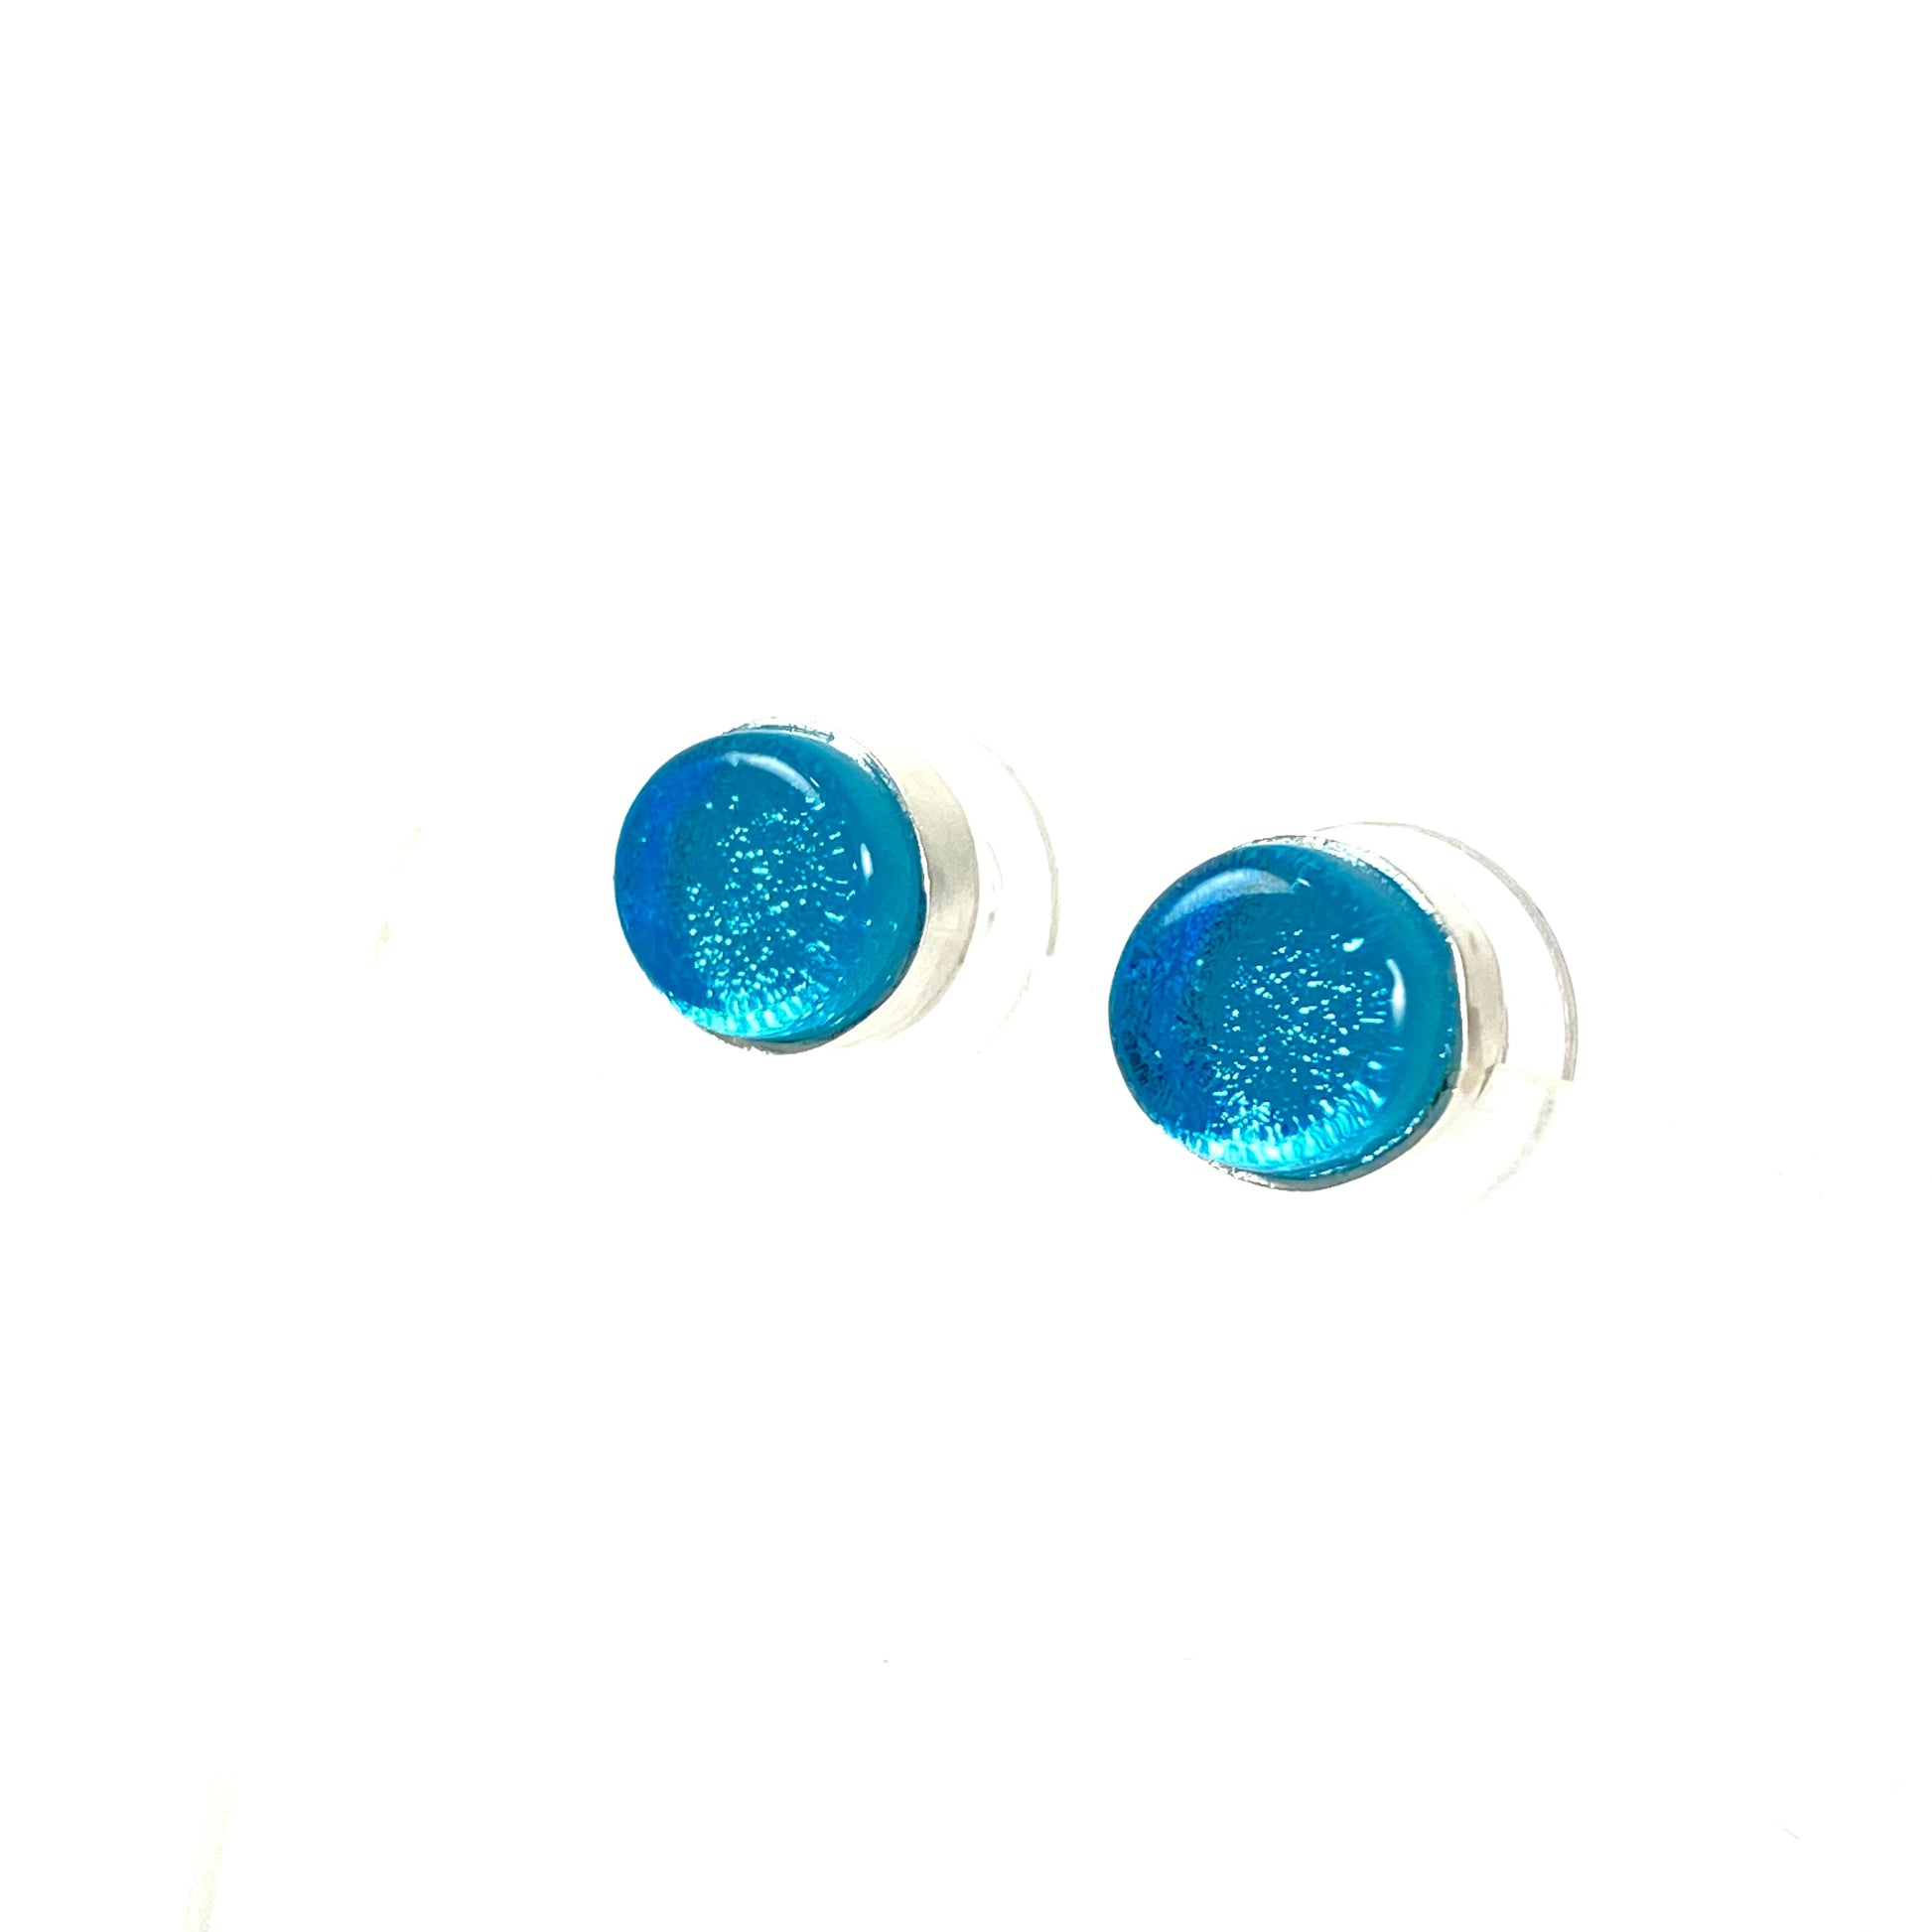 Circle post earrings in silver blue glass, fused glass, glass jewelry, glass and silver jewelry, handmade, handcrafted, American Craft, hand fabricated jewelry, hand fabricated jewellery, Athen, Georgia, colorful jewelry, sparkle, bullseye glass, dichroic glass, art jewelry